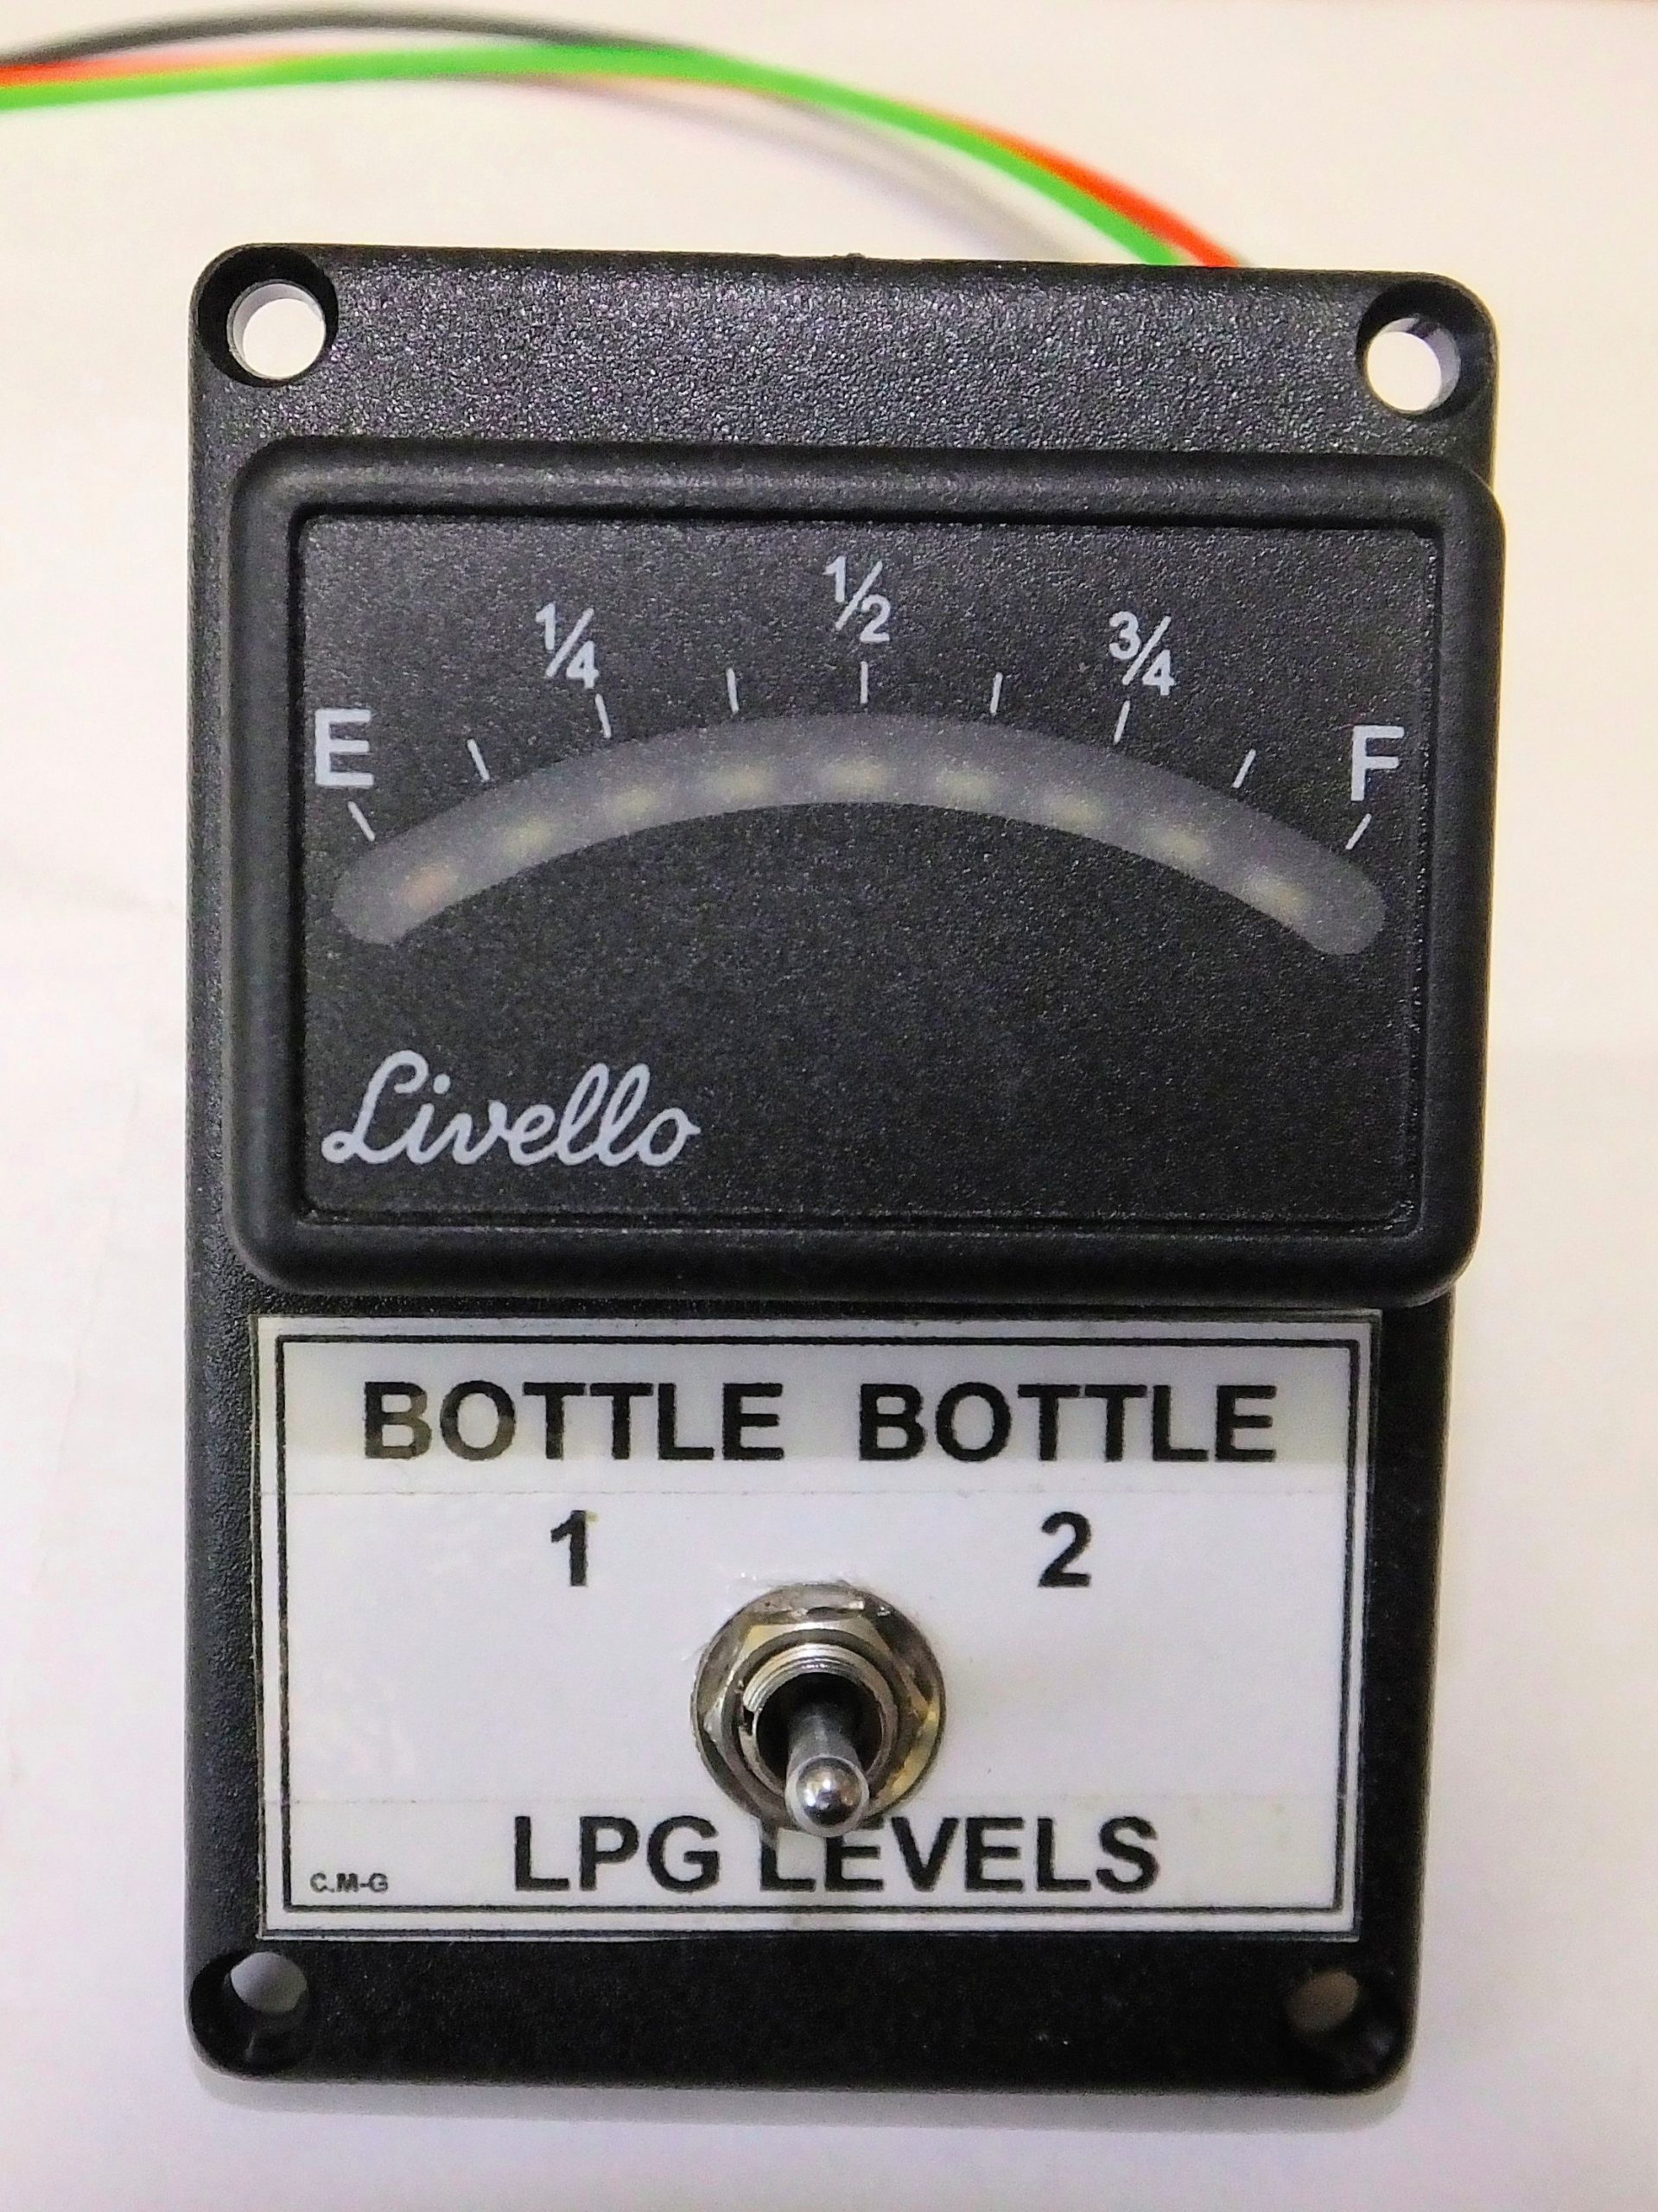 gas level indicator - Official Gaslow Website for LPG Refillable